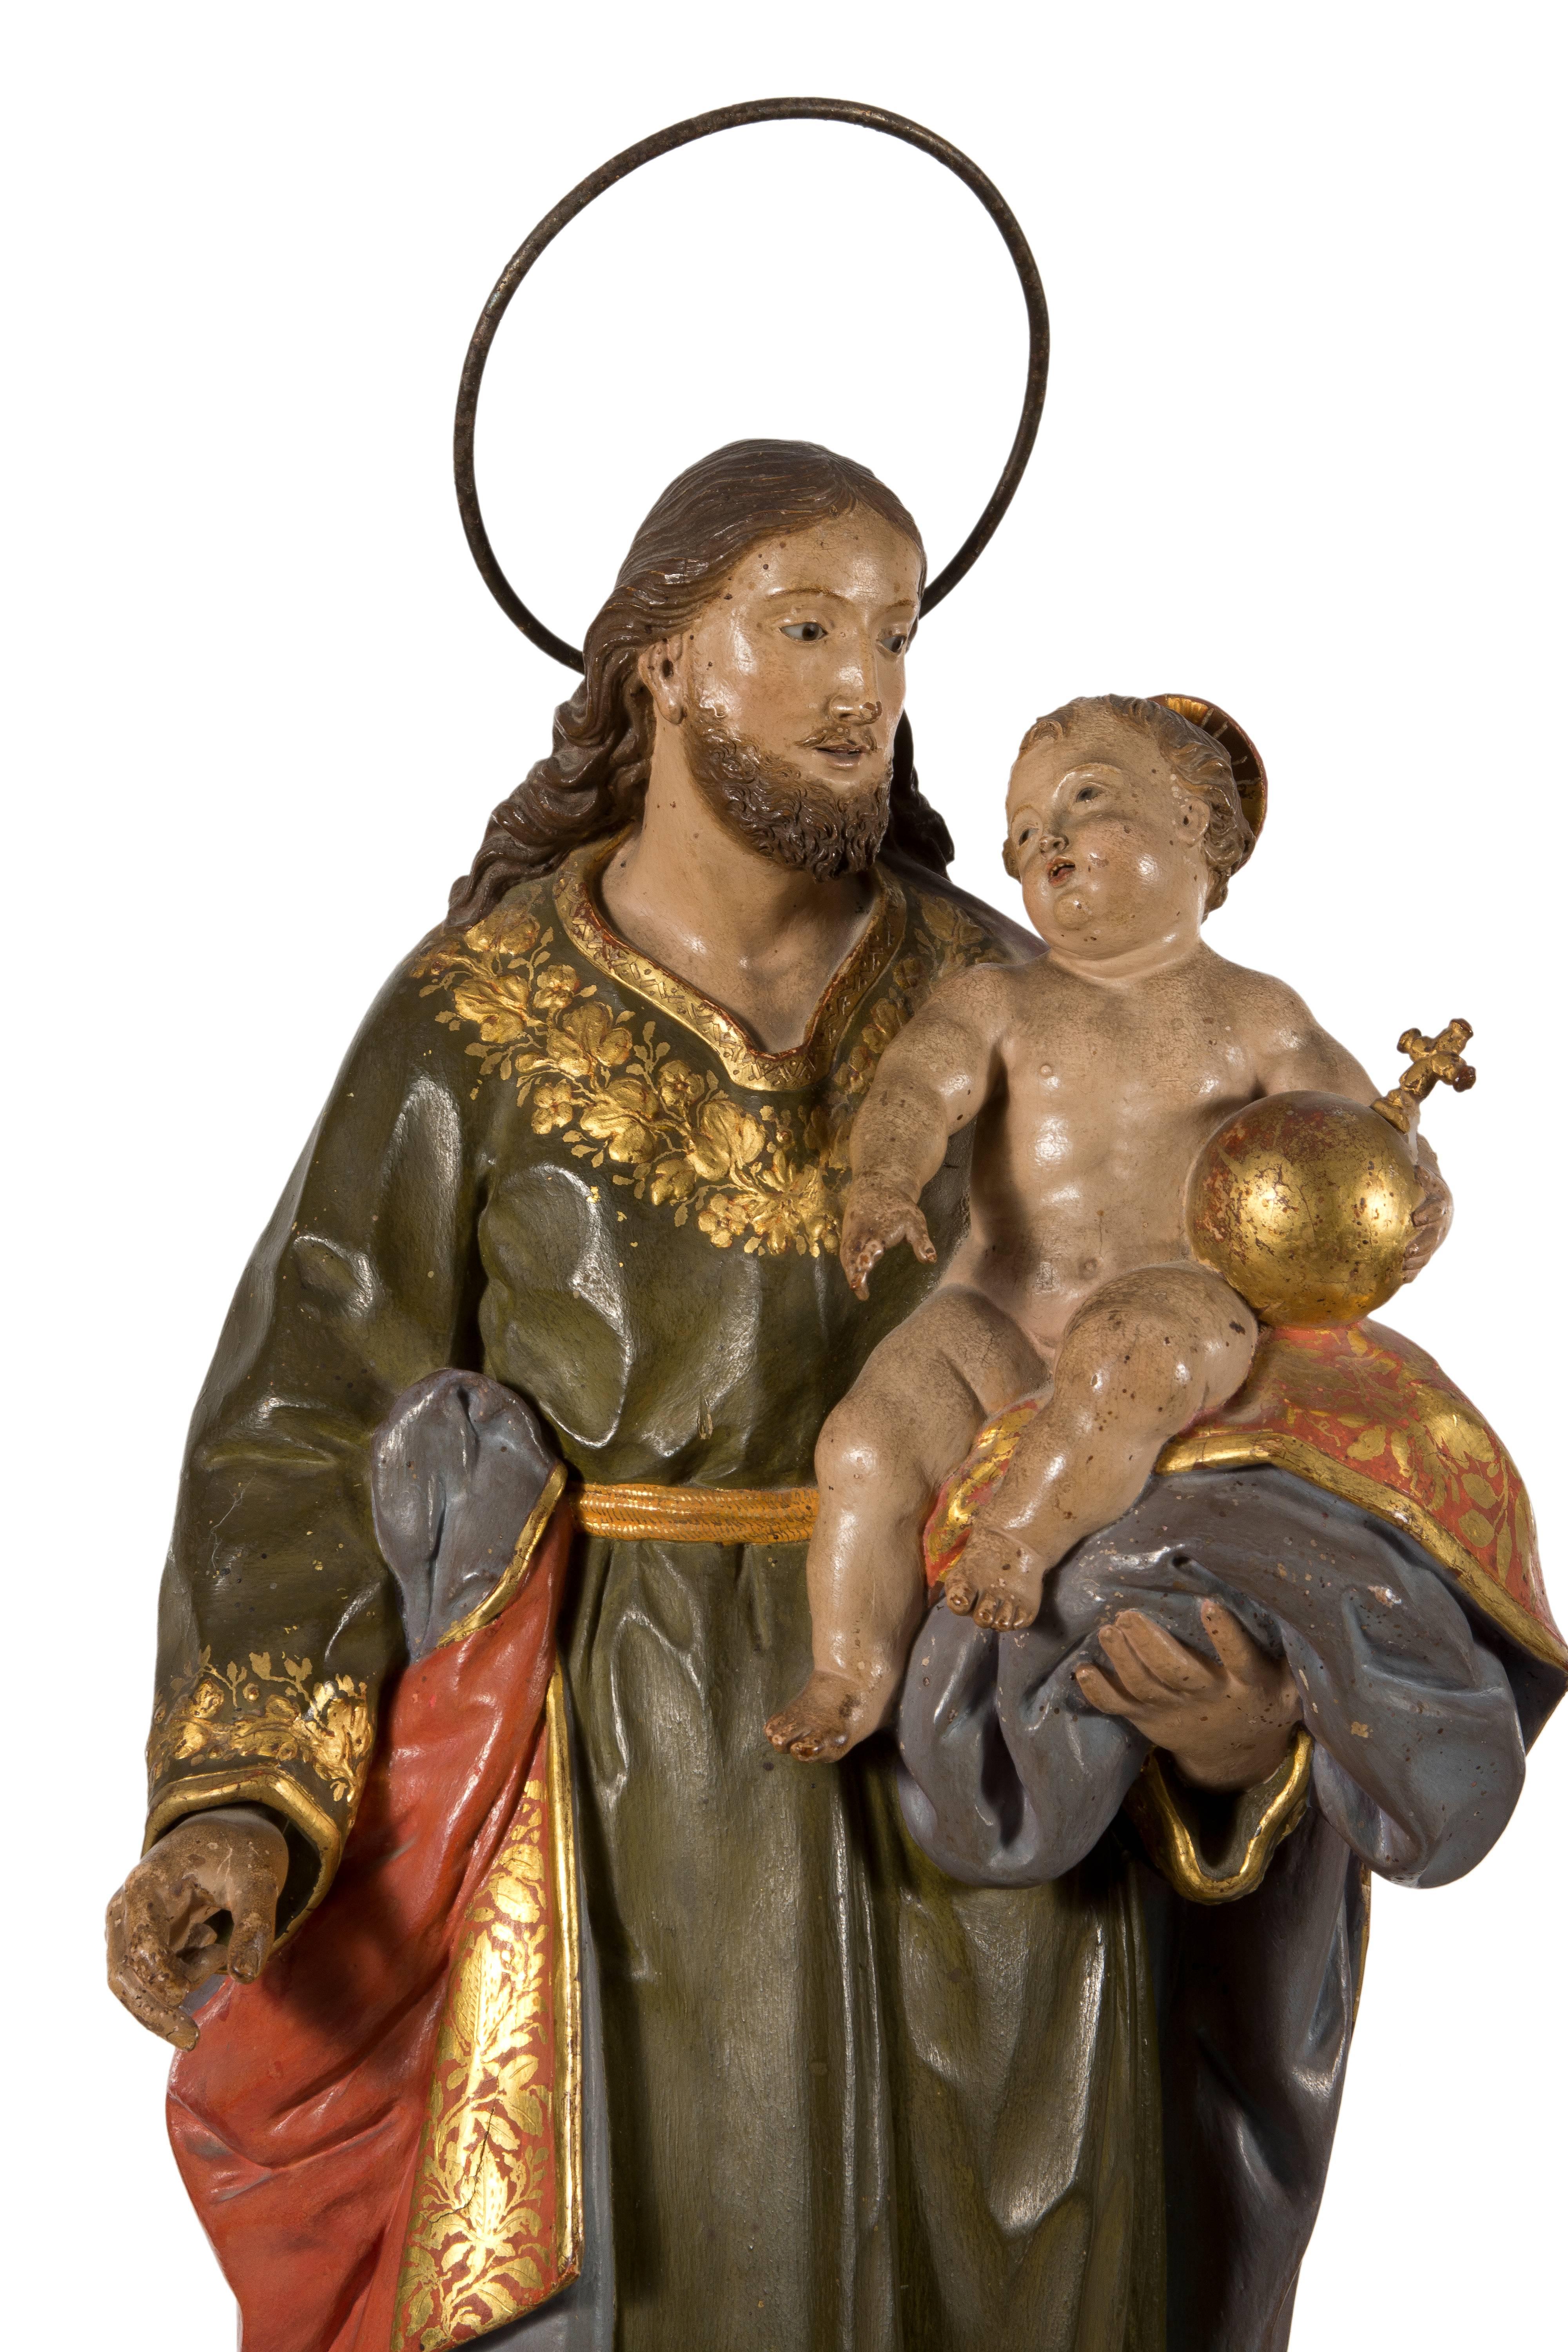 Saint Joseph with the child Jesus. Carved and polychromed wood. Andalusian school, Spain, 18th century.
The figure stands on a small pedestal with a rectangular base and a simple front, with clean lines, with two curves on the sides and a grill